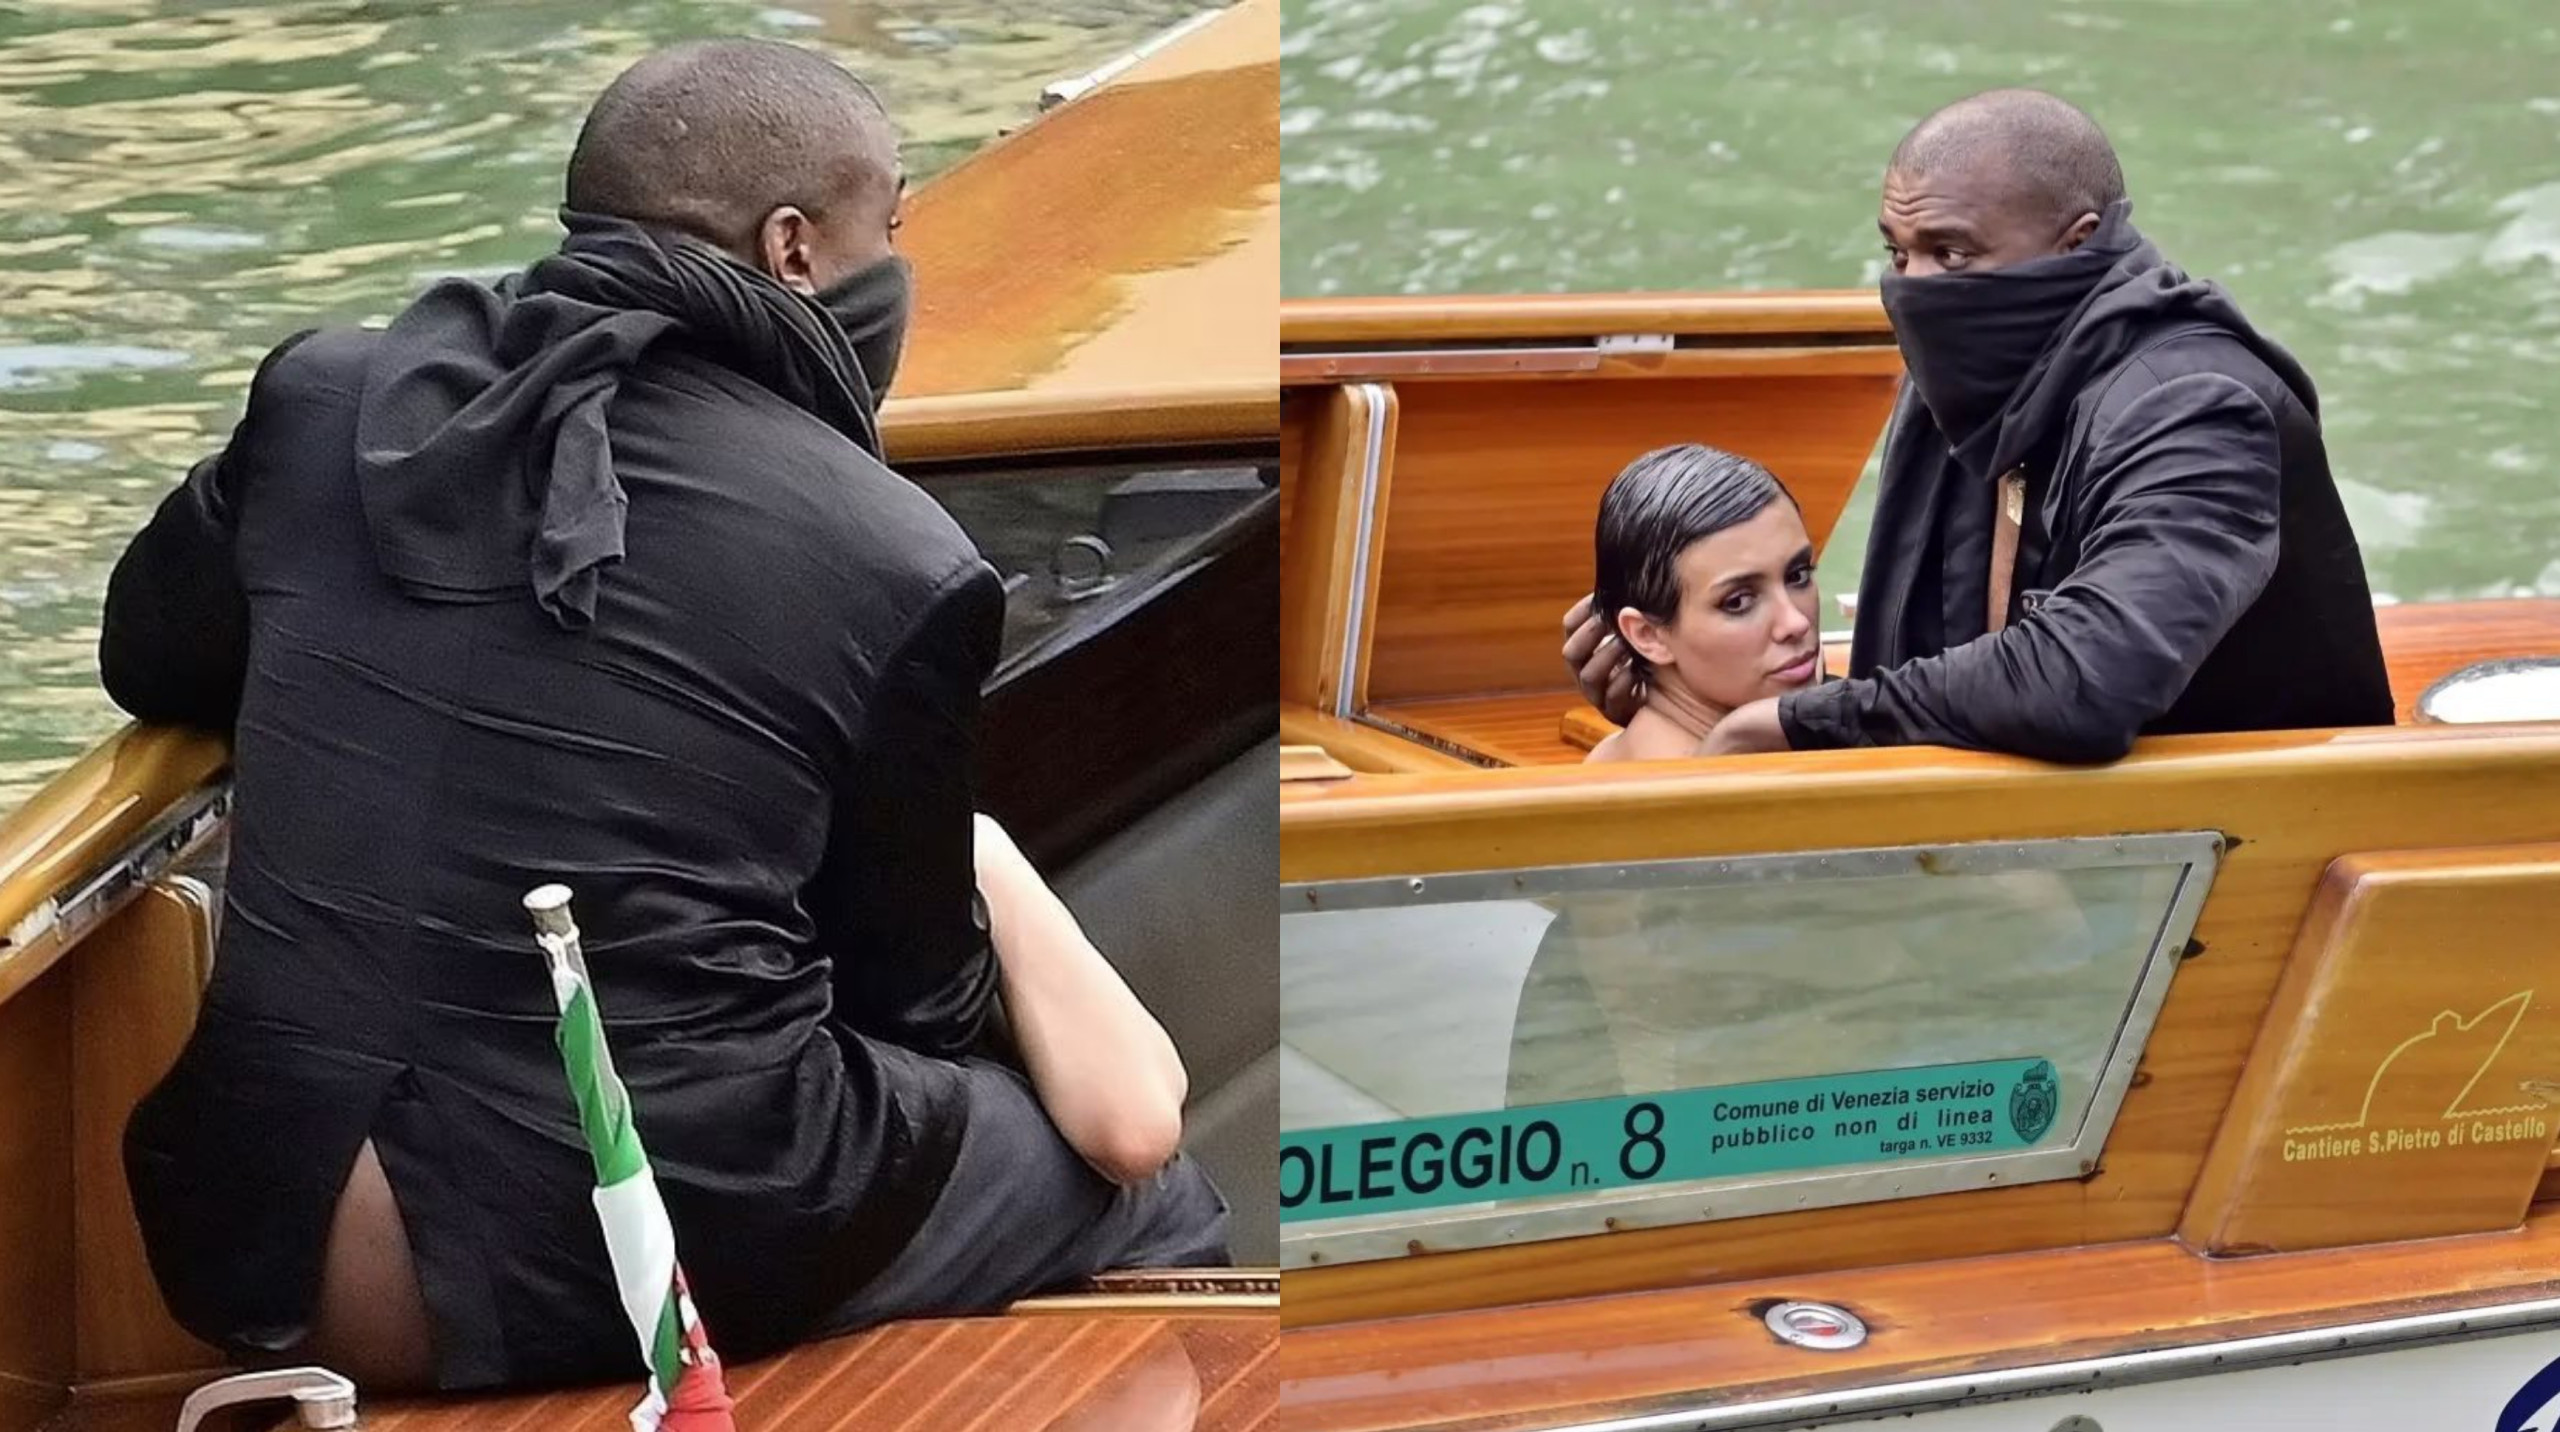 Kanye West and Wife Bianca Banned by Venice Boat Company Over Controversial Boat Ride